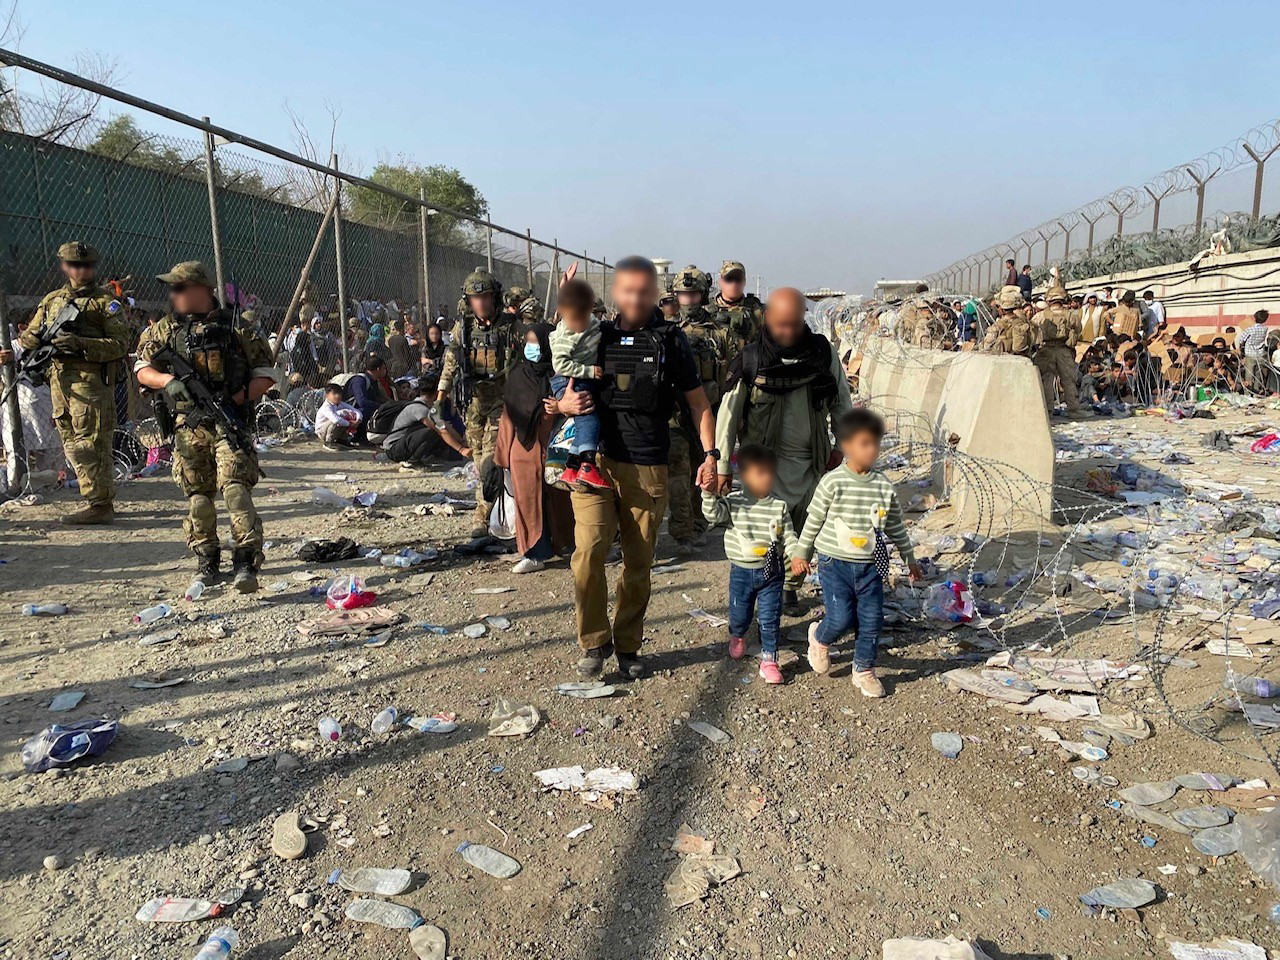 Picture of the proximity of the Kabul airfield. A member of the Finnish aid team leads two Afghan children (faces unrecognized). The picture also shows the members of the Finnish security forces and a lot of local people in the background.